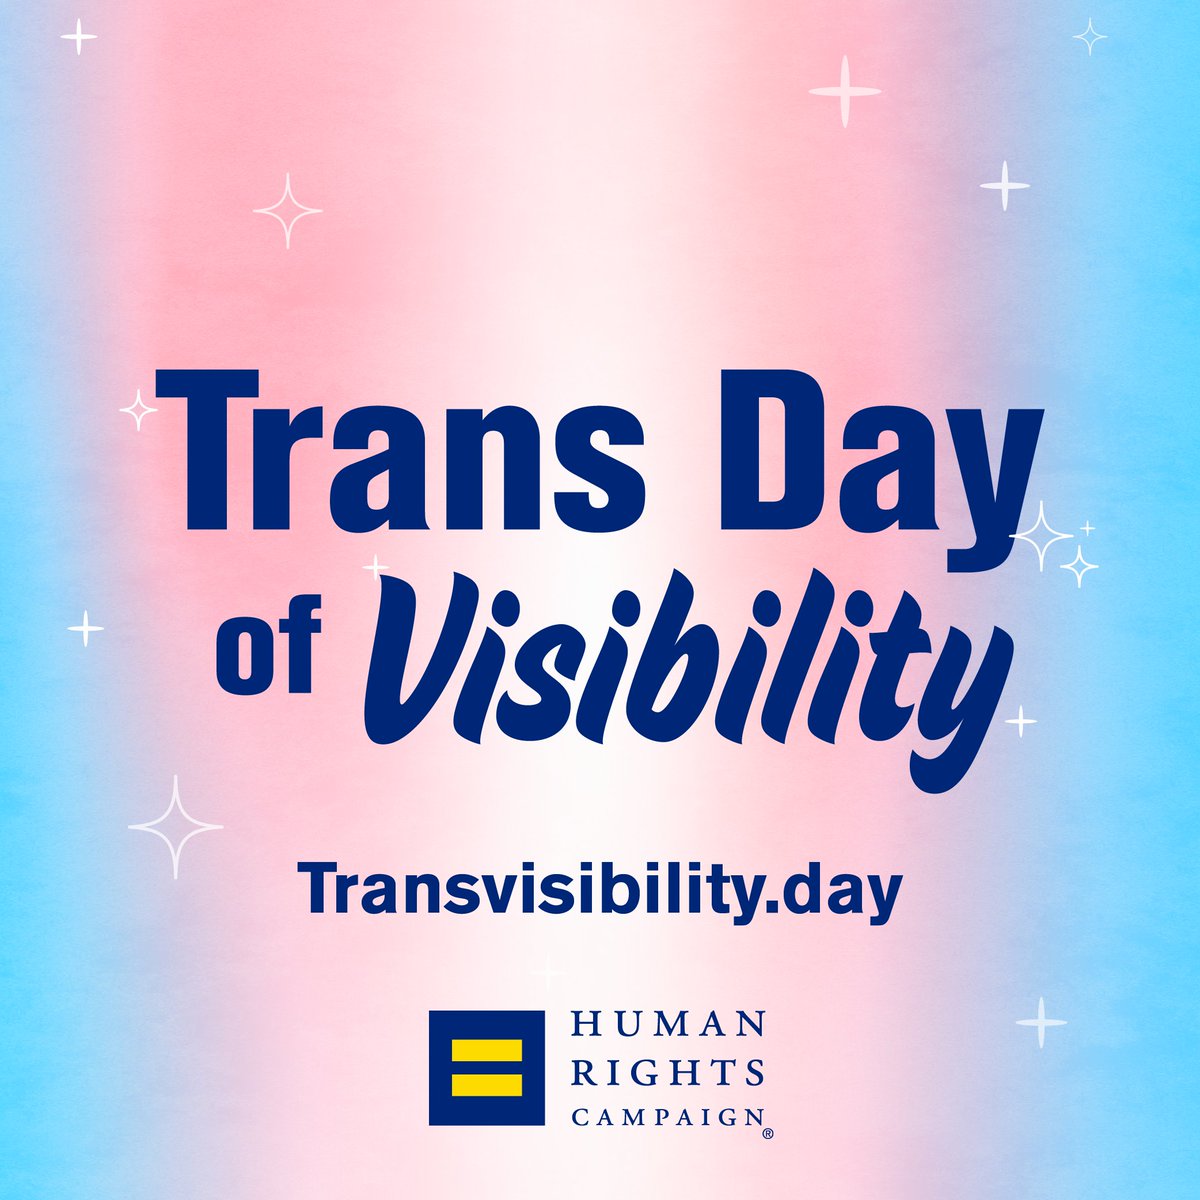 No matter what, we will keep showing up and living our best lives as our full, authentic selves. This #TransDayOfVisability and every day, we will: 🩵 celebrate trans joy 🤍 advocate for trans rights 🩷 uplift trans visibility Join us: transvisibility.day 🏳️‍⚧️